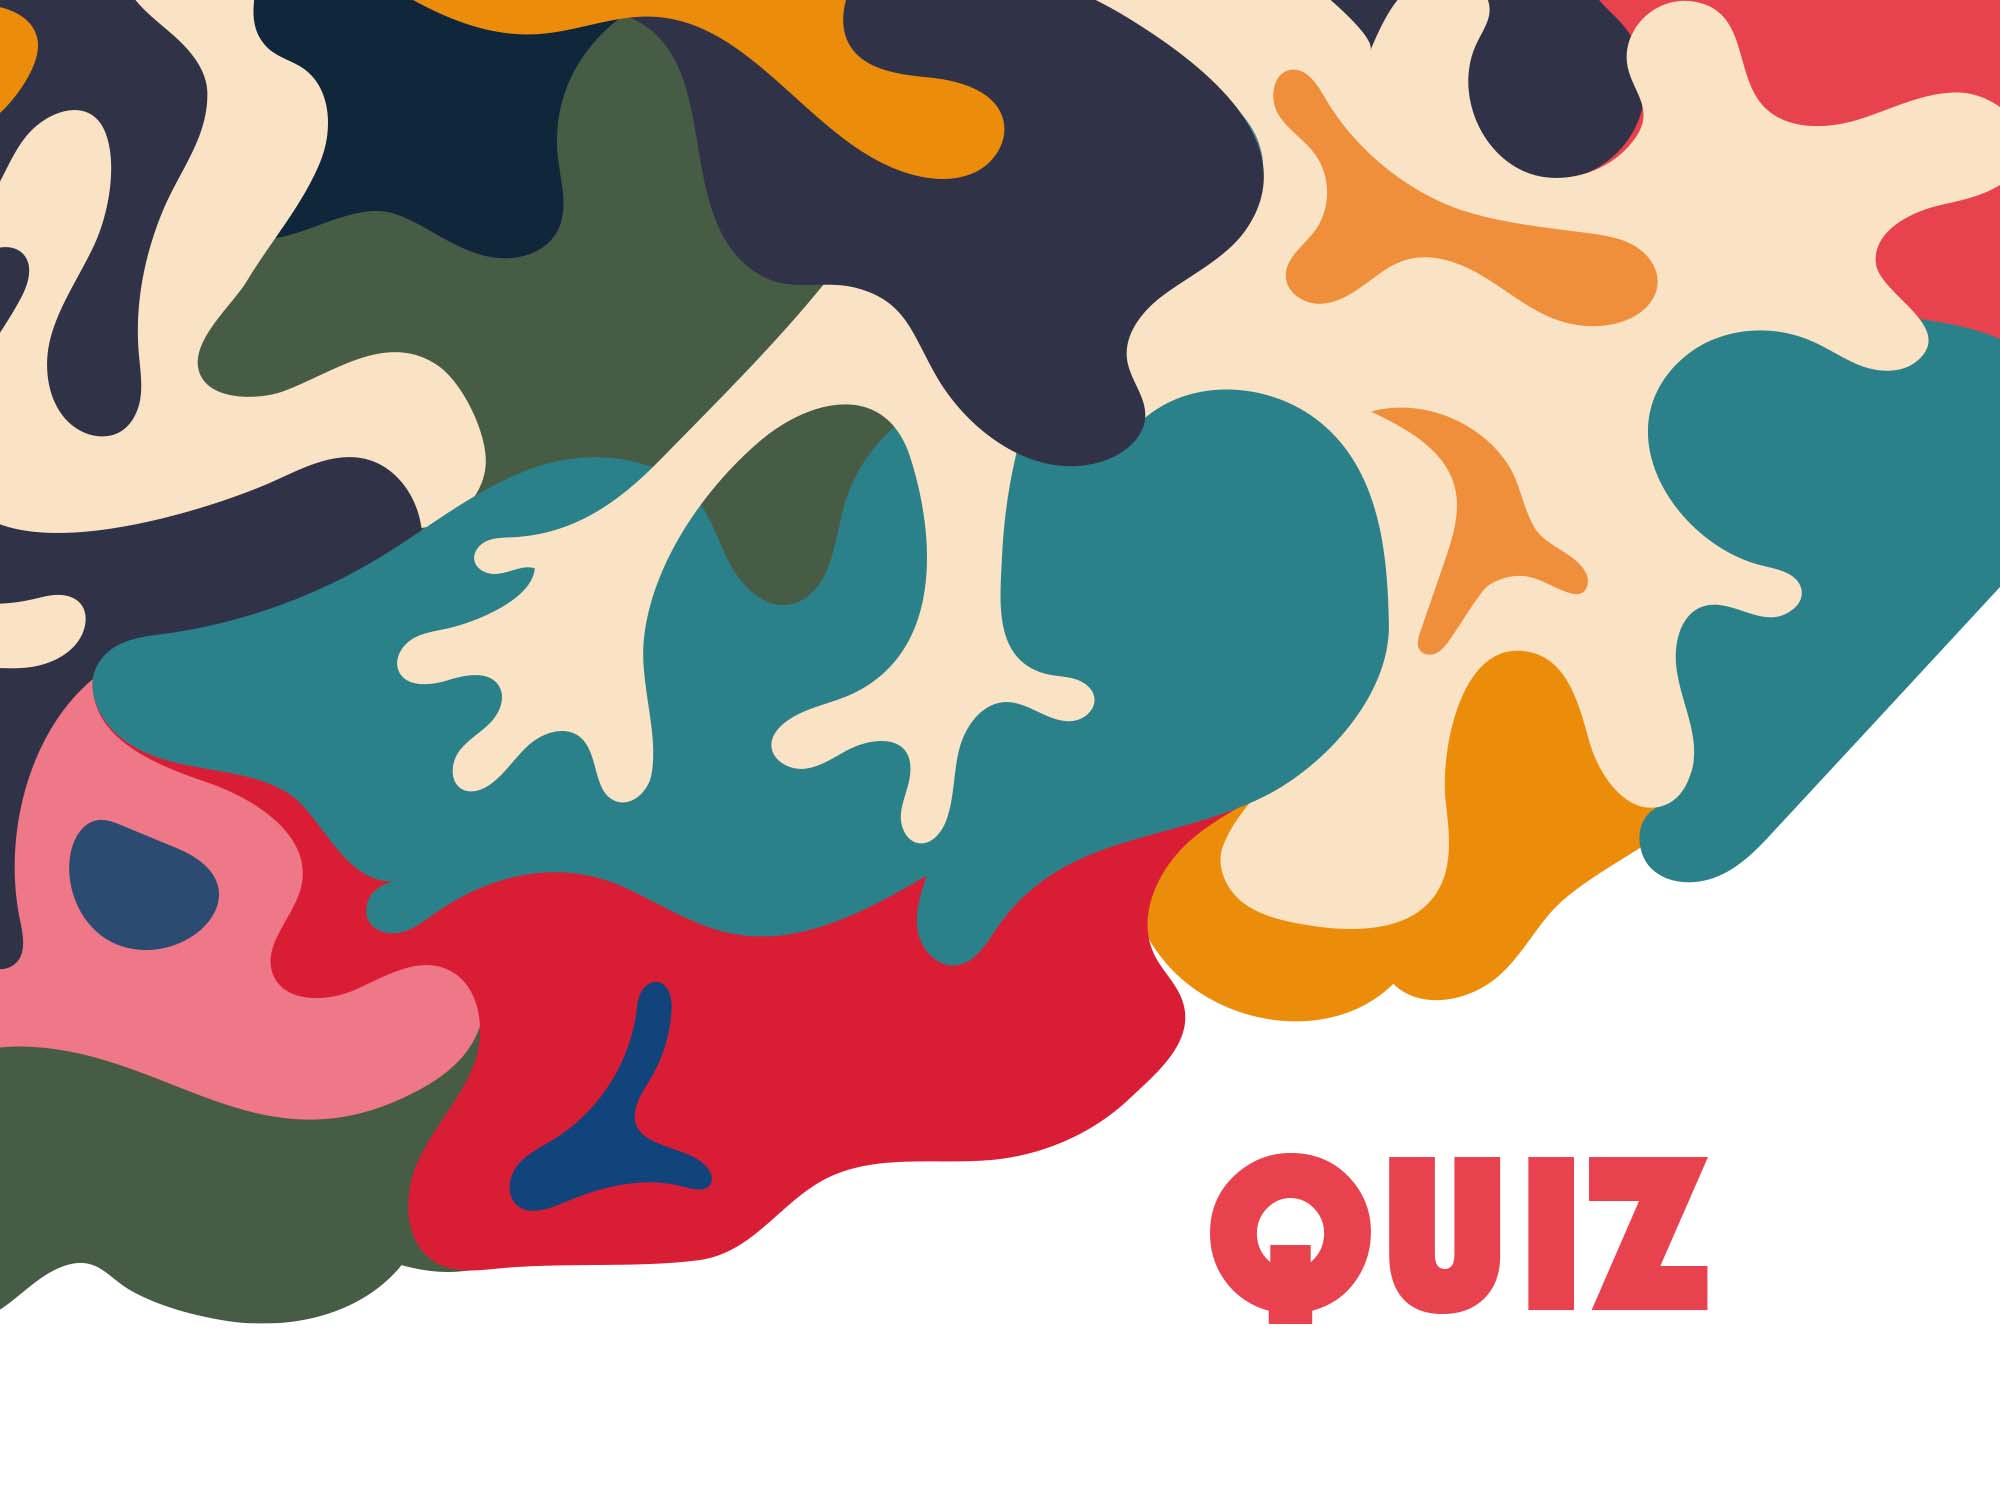 Quiz: “Who wants to be a neuroscientist?”